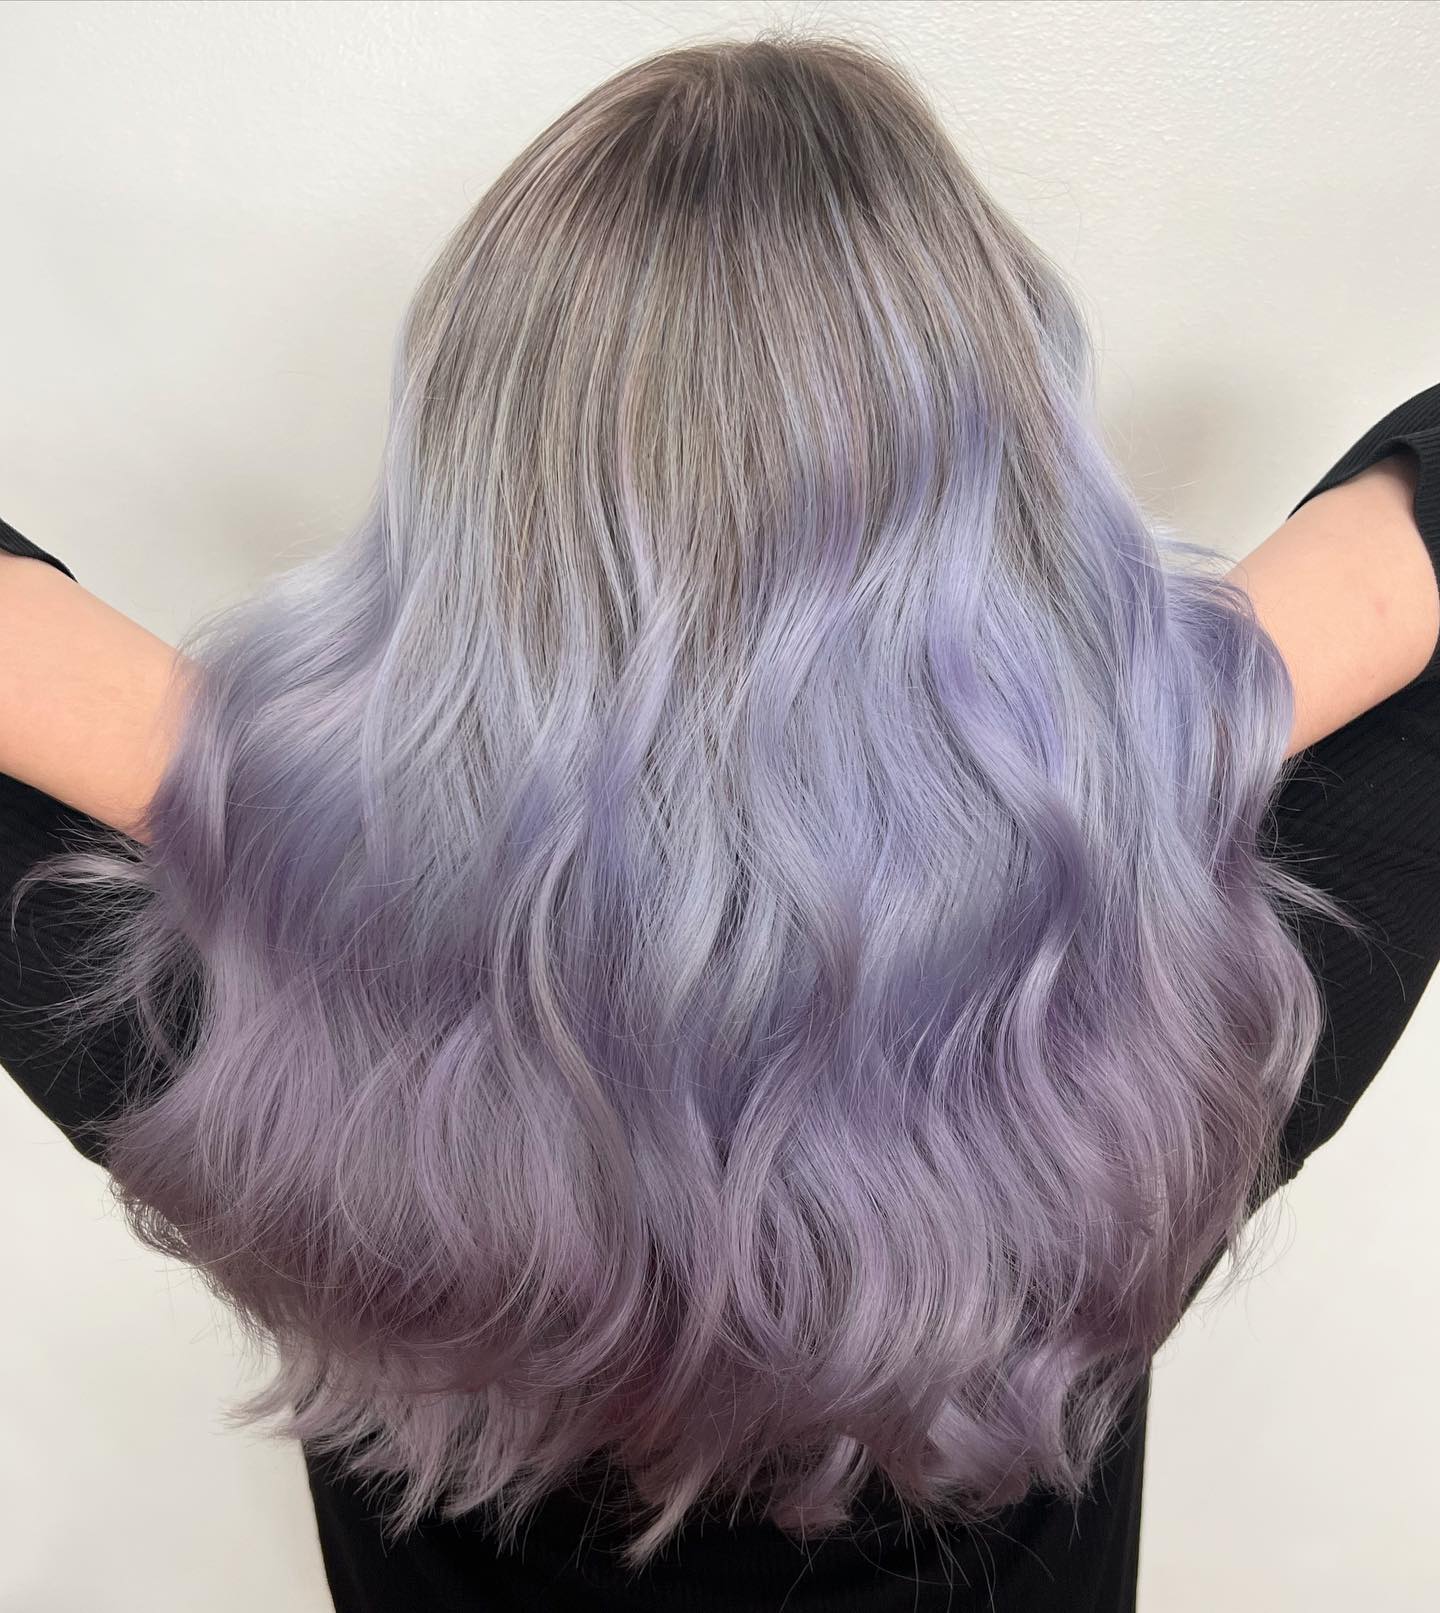 Long Silver Ombre Hair Color with Light Purple Hues